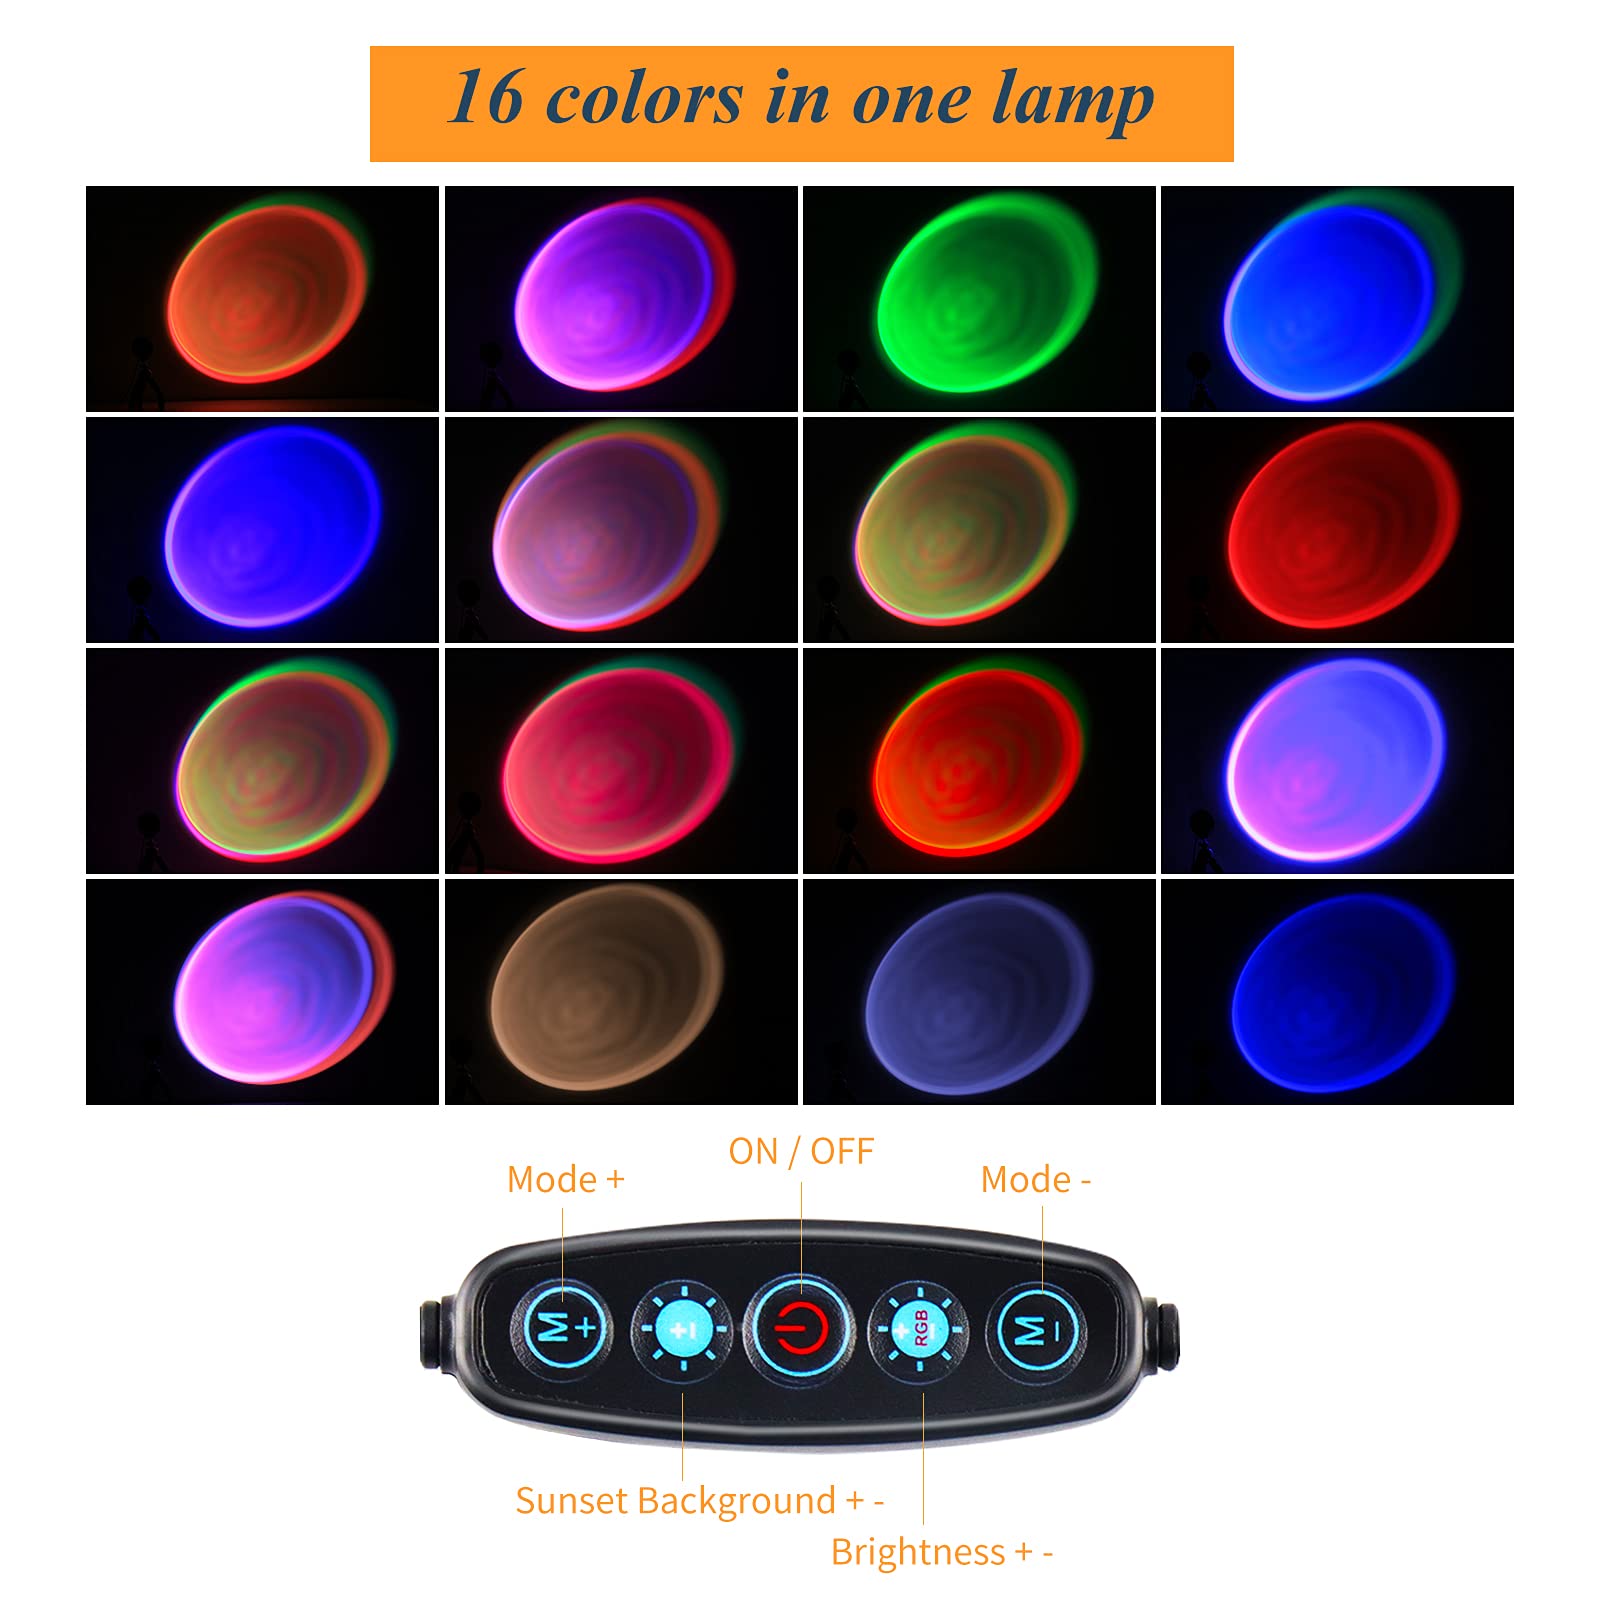 Nellsi Sunset Lamp Projection, 16 Colors Changing Projector LED Lights Floor Lamp Room Decor Night Light 360 Degree Rotation for Christmas Decorations Photography/Party/Bedroom/Home Decor Sunset Lamps